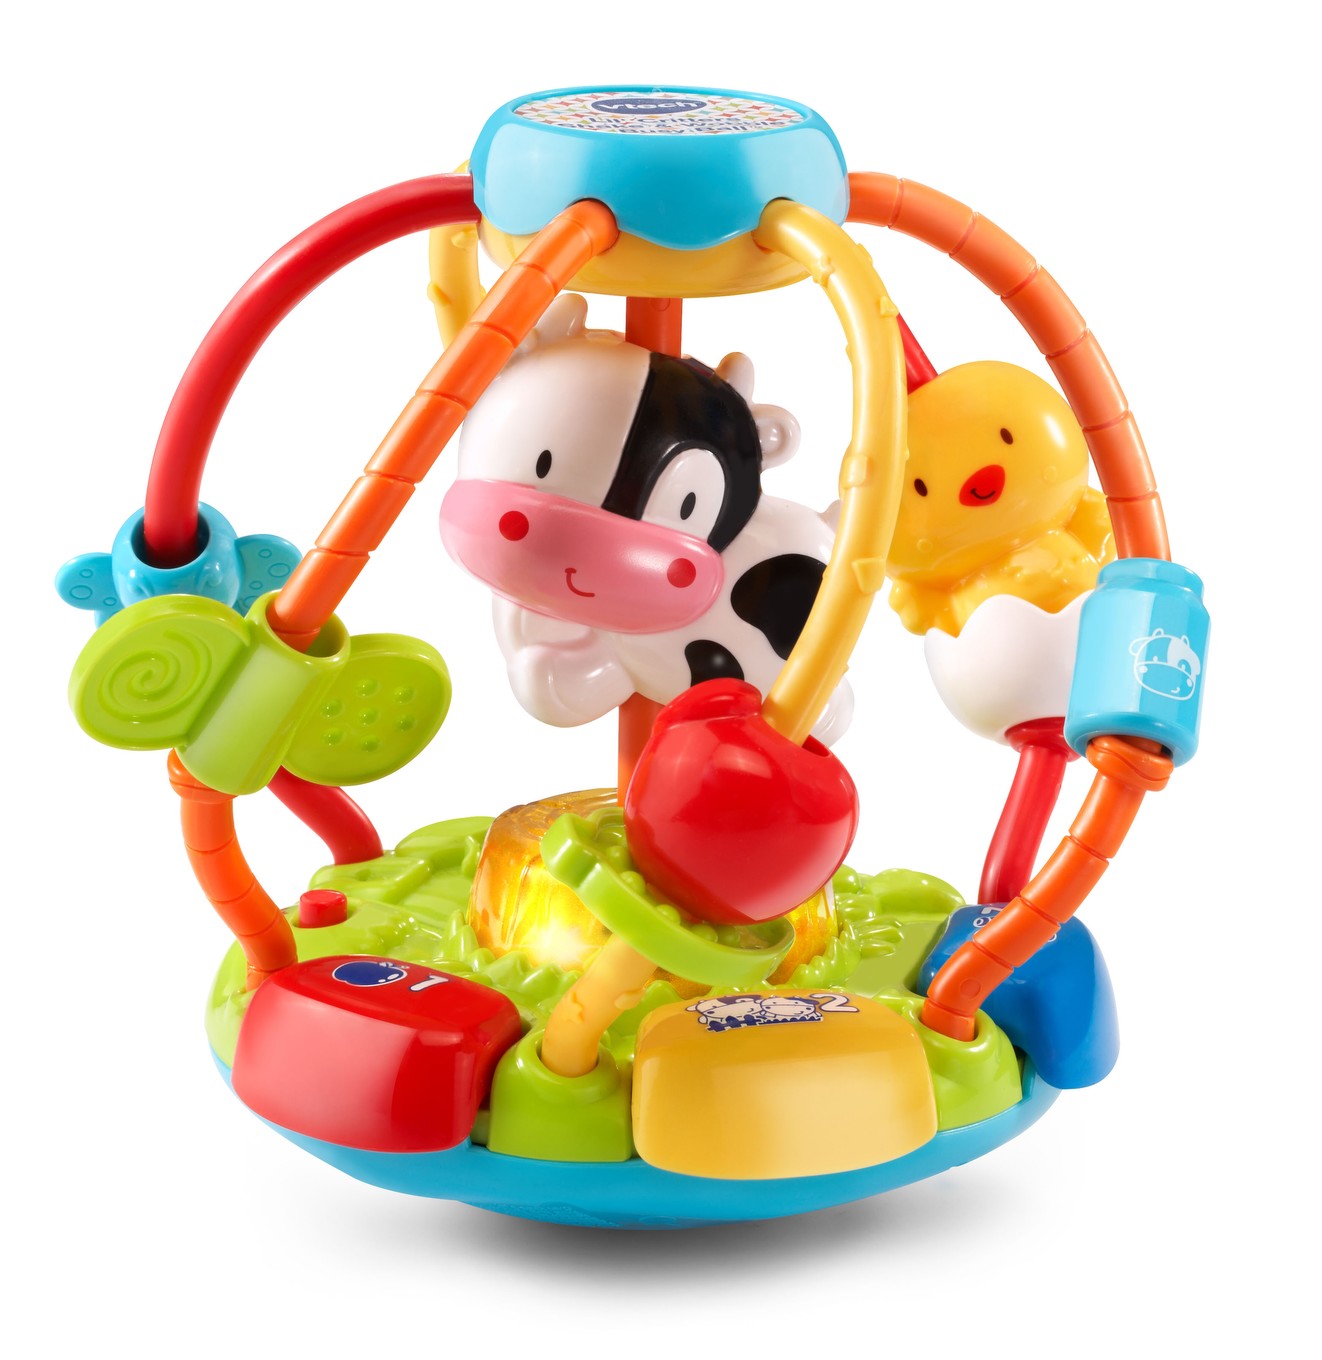 Lil' Critters Shake & Wobble Busy Ball™ | VTech®